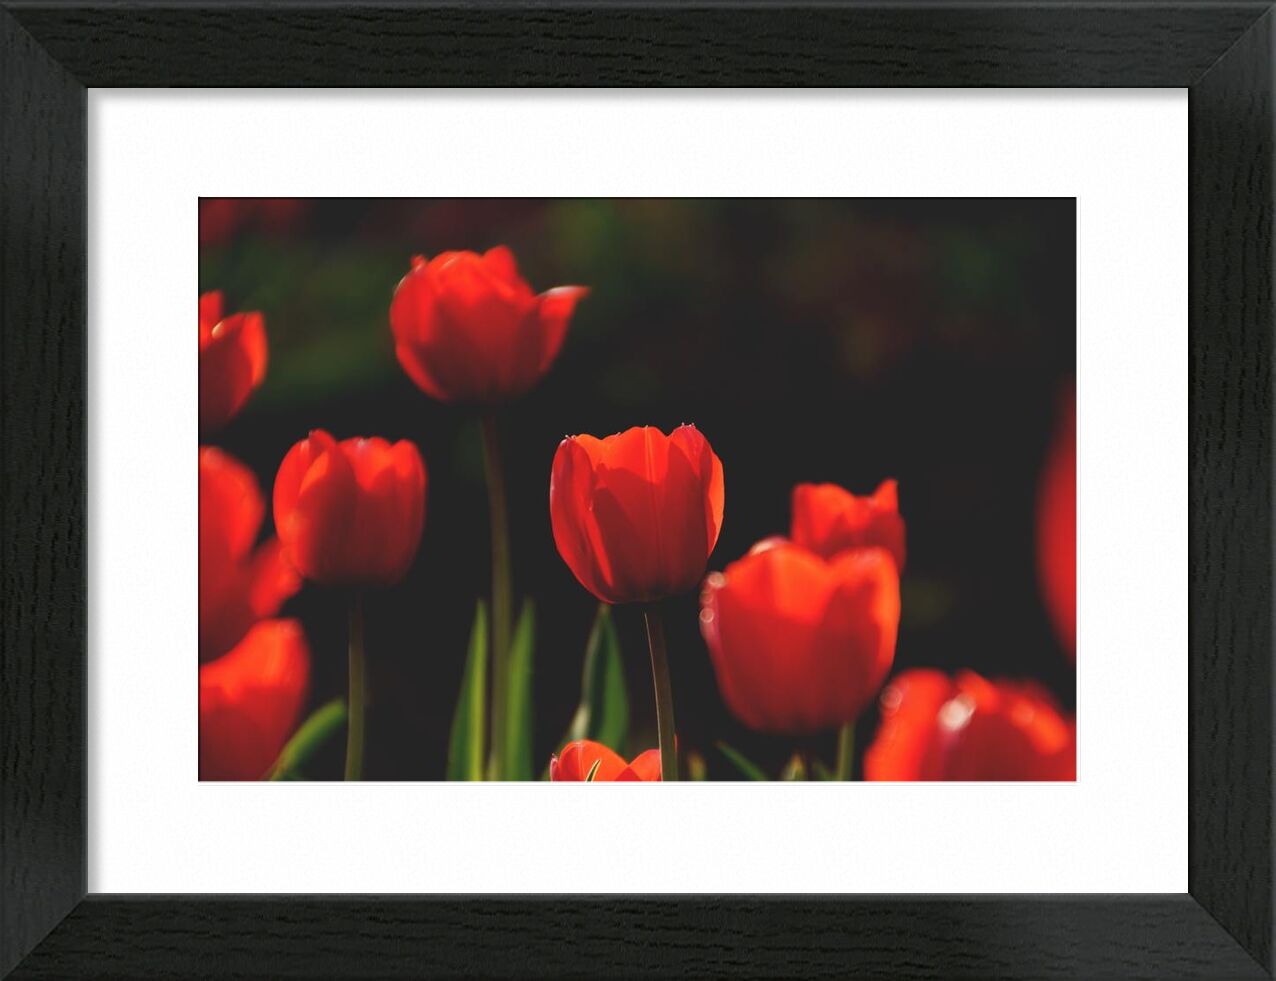 Our red tulips from Pierre Gaultier, Prodi Art, bloom, blooming, blossom, blur, botanical, bright, close-up, field, flora, flowers, garden, growth, leaves, nature, outdoors, petals, red, tulips